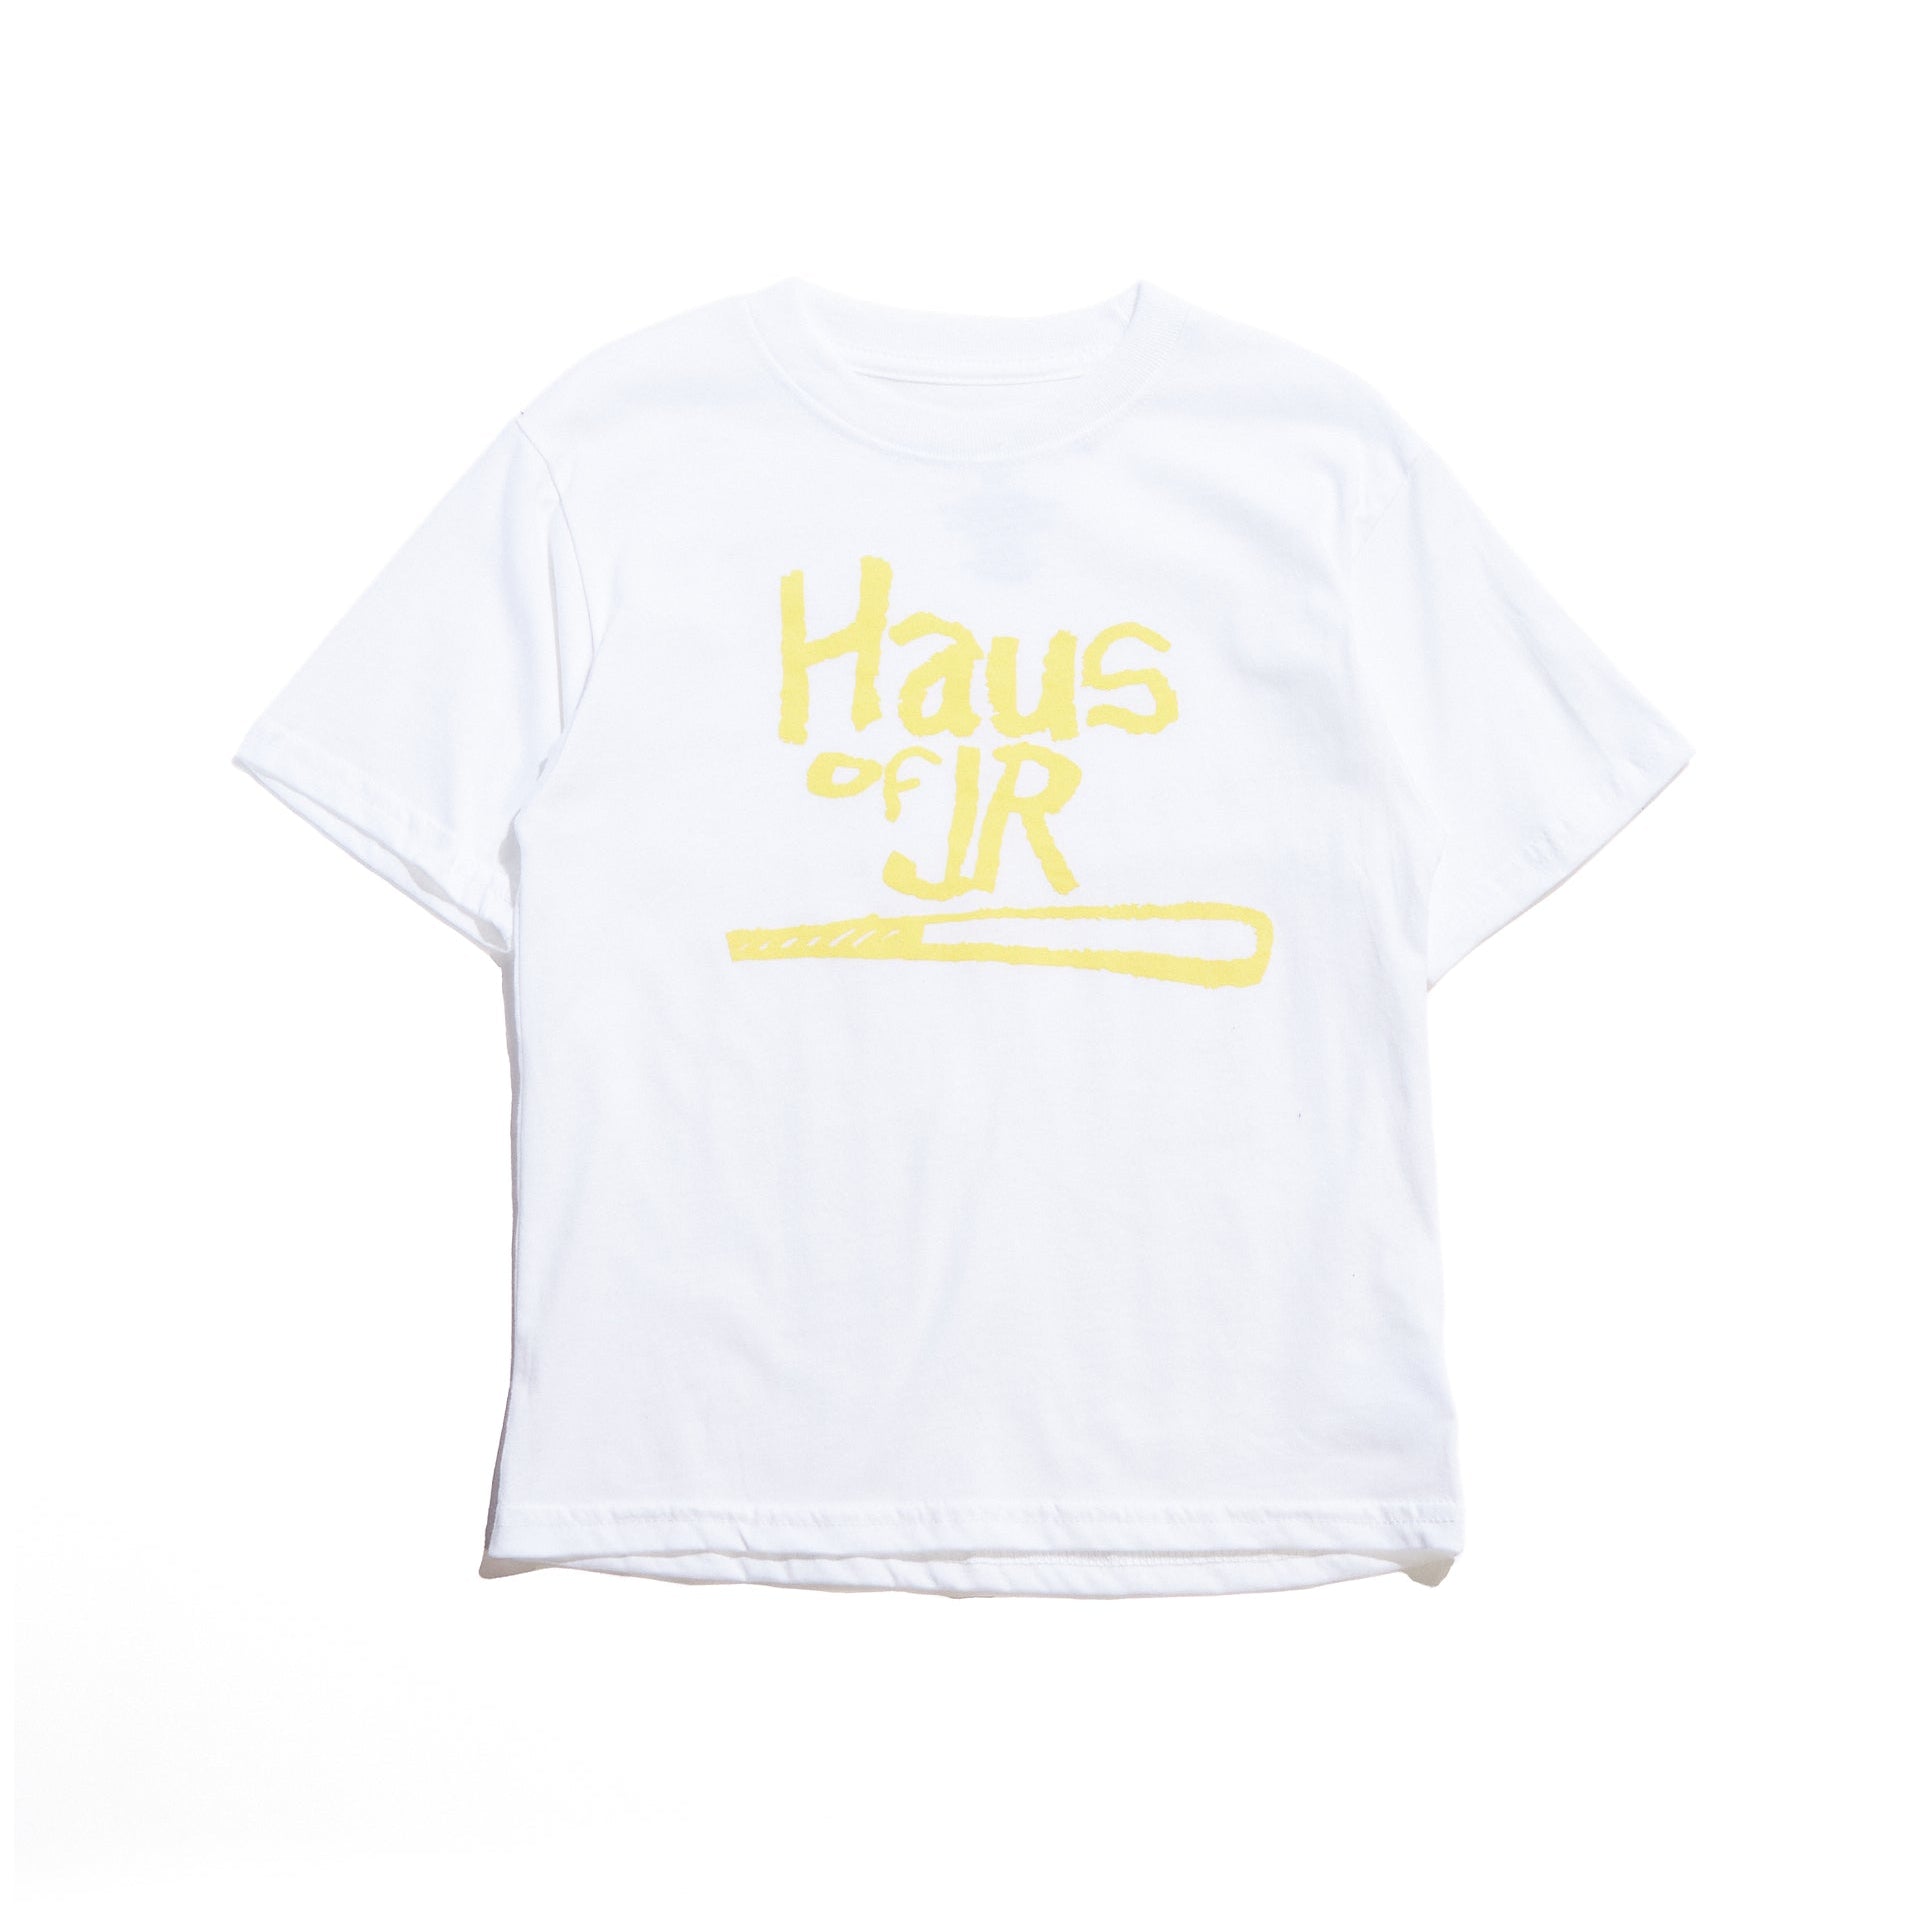 Knotty Tee (White) Tops Haus of JR 